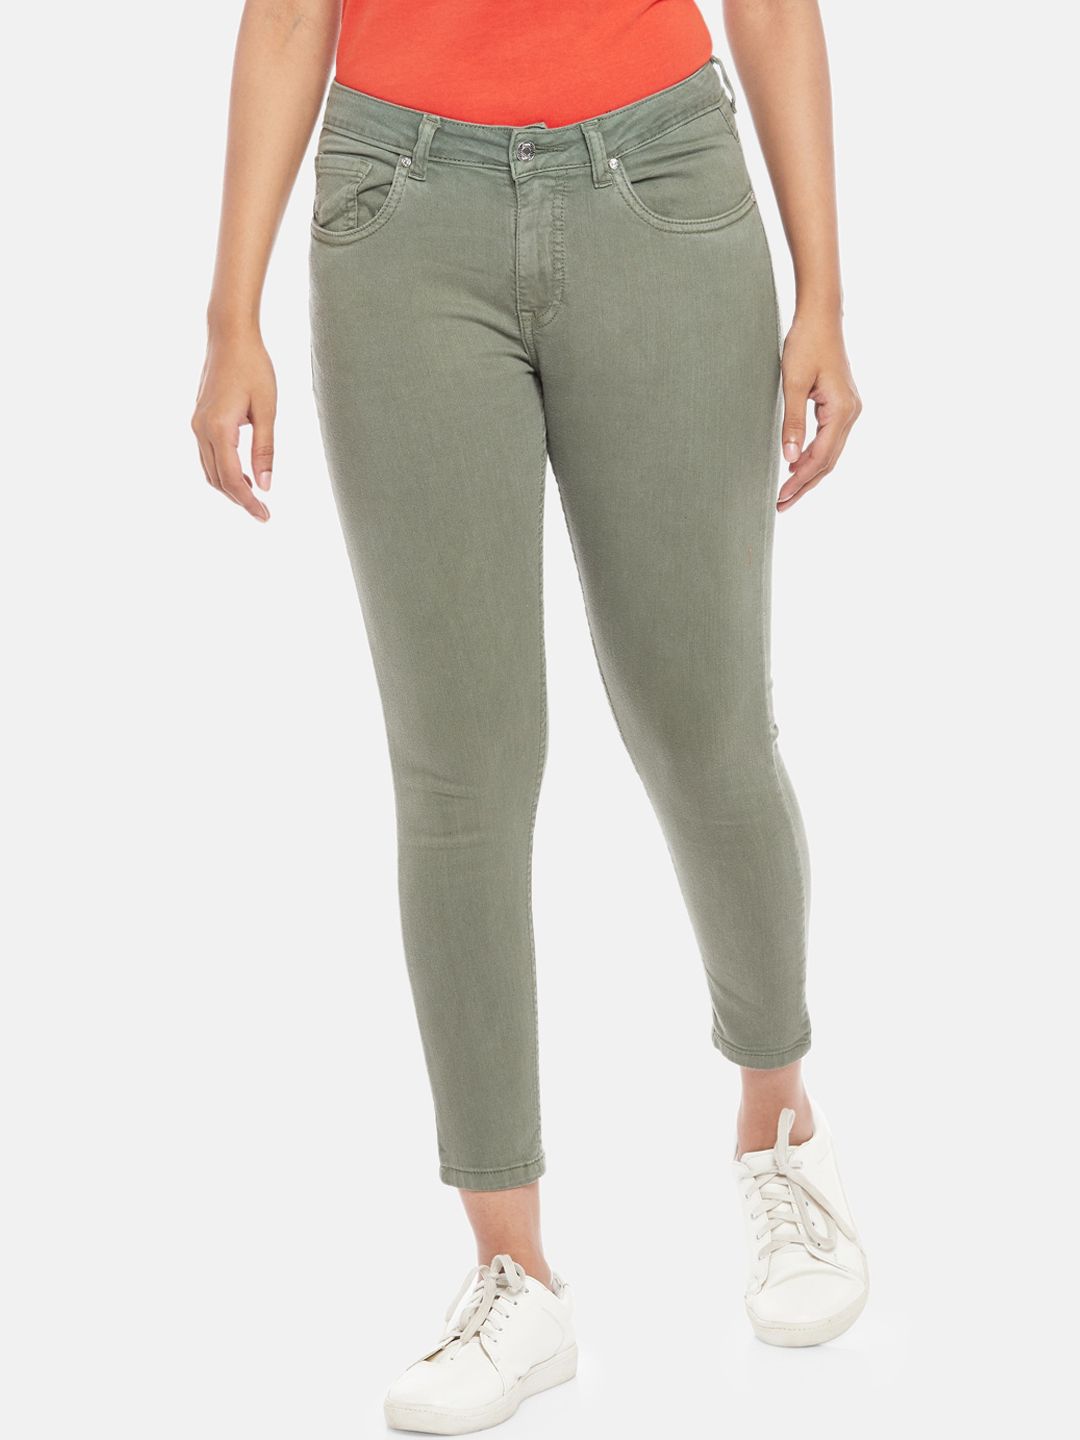 People Women Olive Green Slim Fit Jeans Price in India